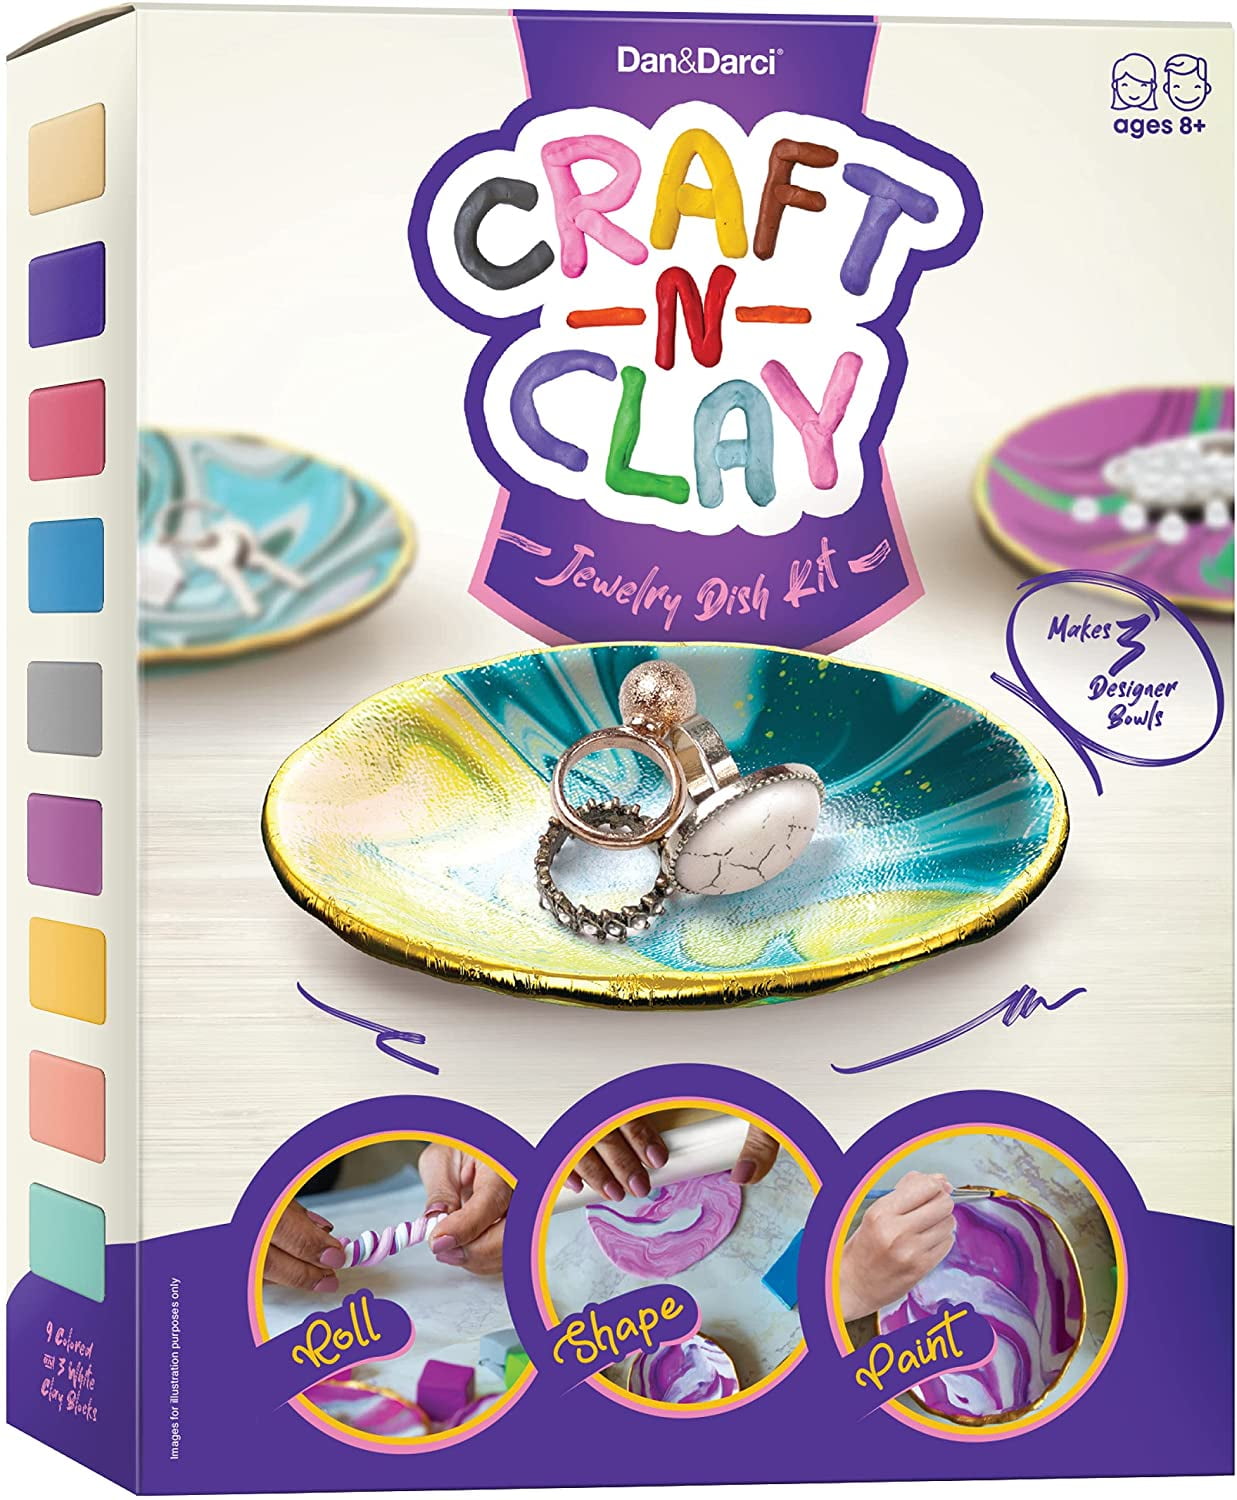 Make Your Own Clay Jewelry – Clay Jewelry Making Craft Kit for Girls, Arts  and Crafts for Kids Ages 8-12 and Up, Oven Bake Polymer Clay Kit for Creating  Jewelry, Ornament, Handmade